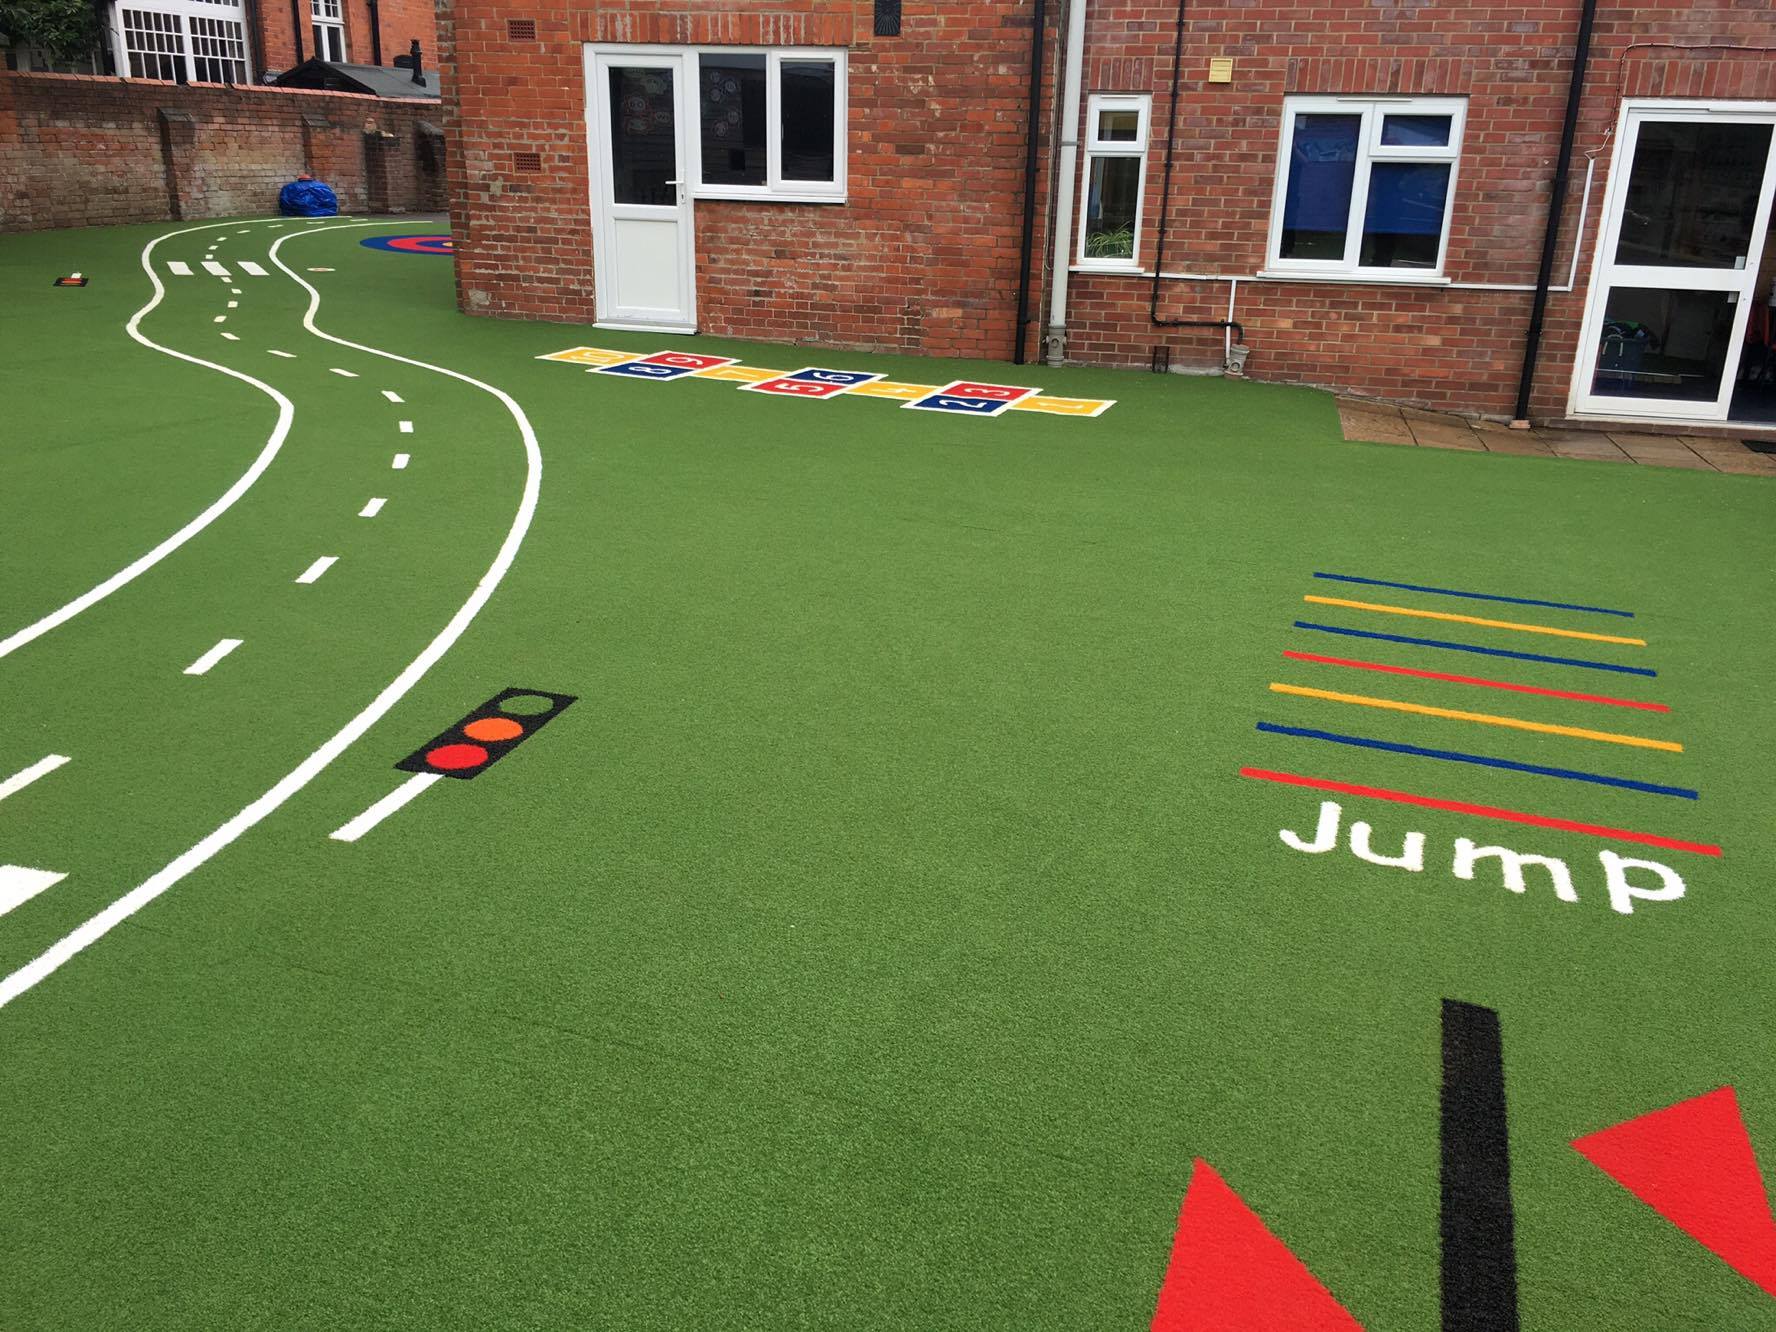 epic artificial turf playground showing roadway and jump line